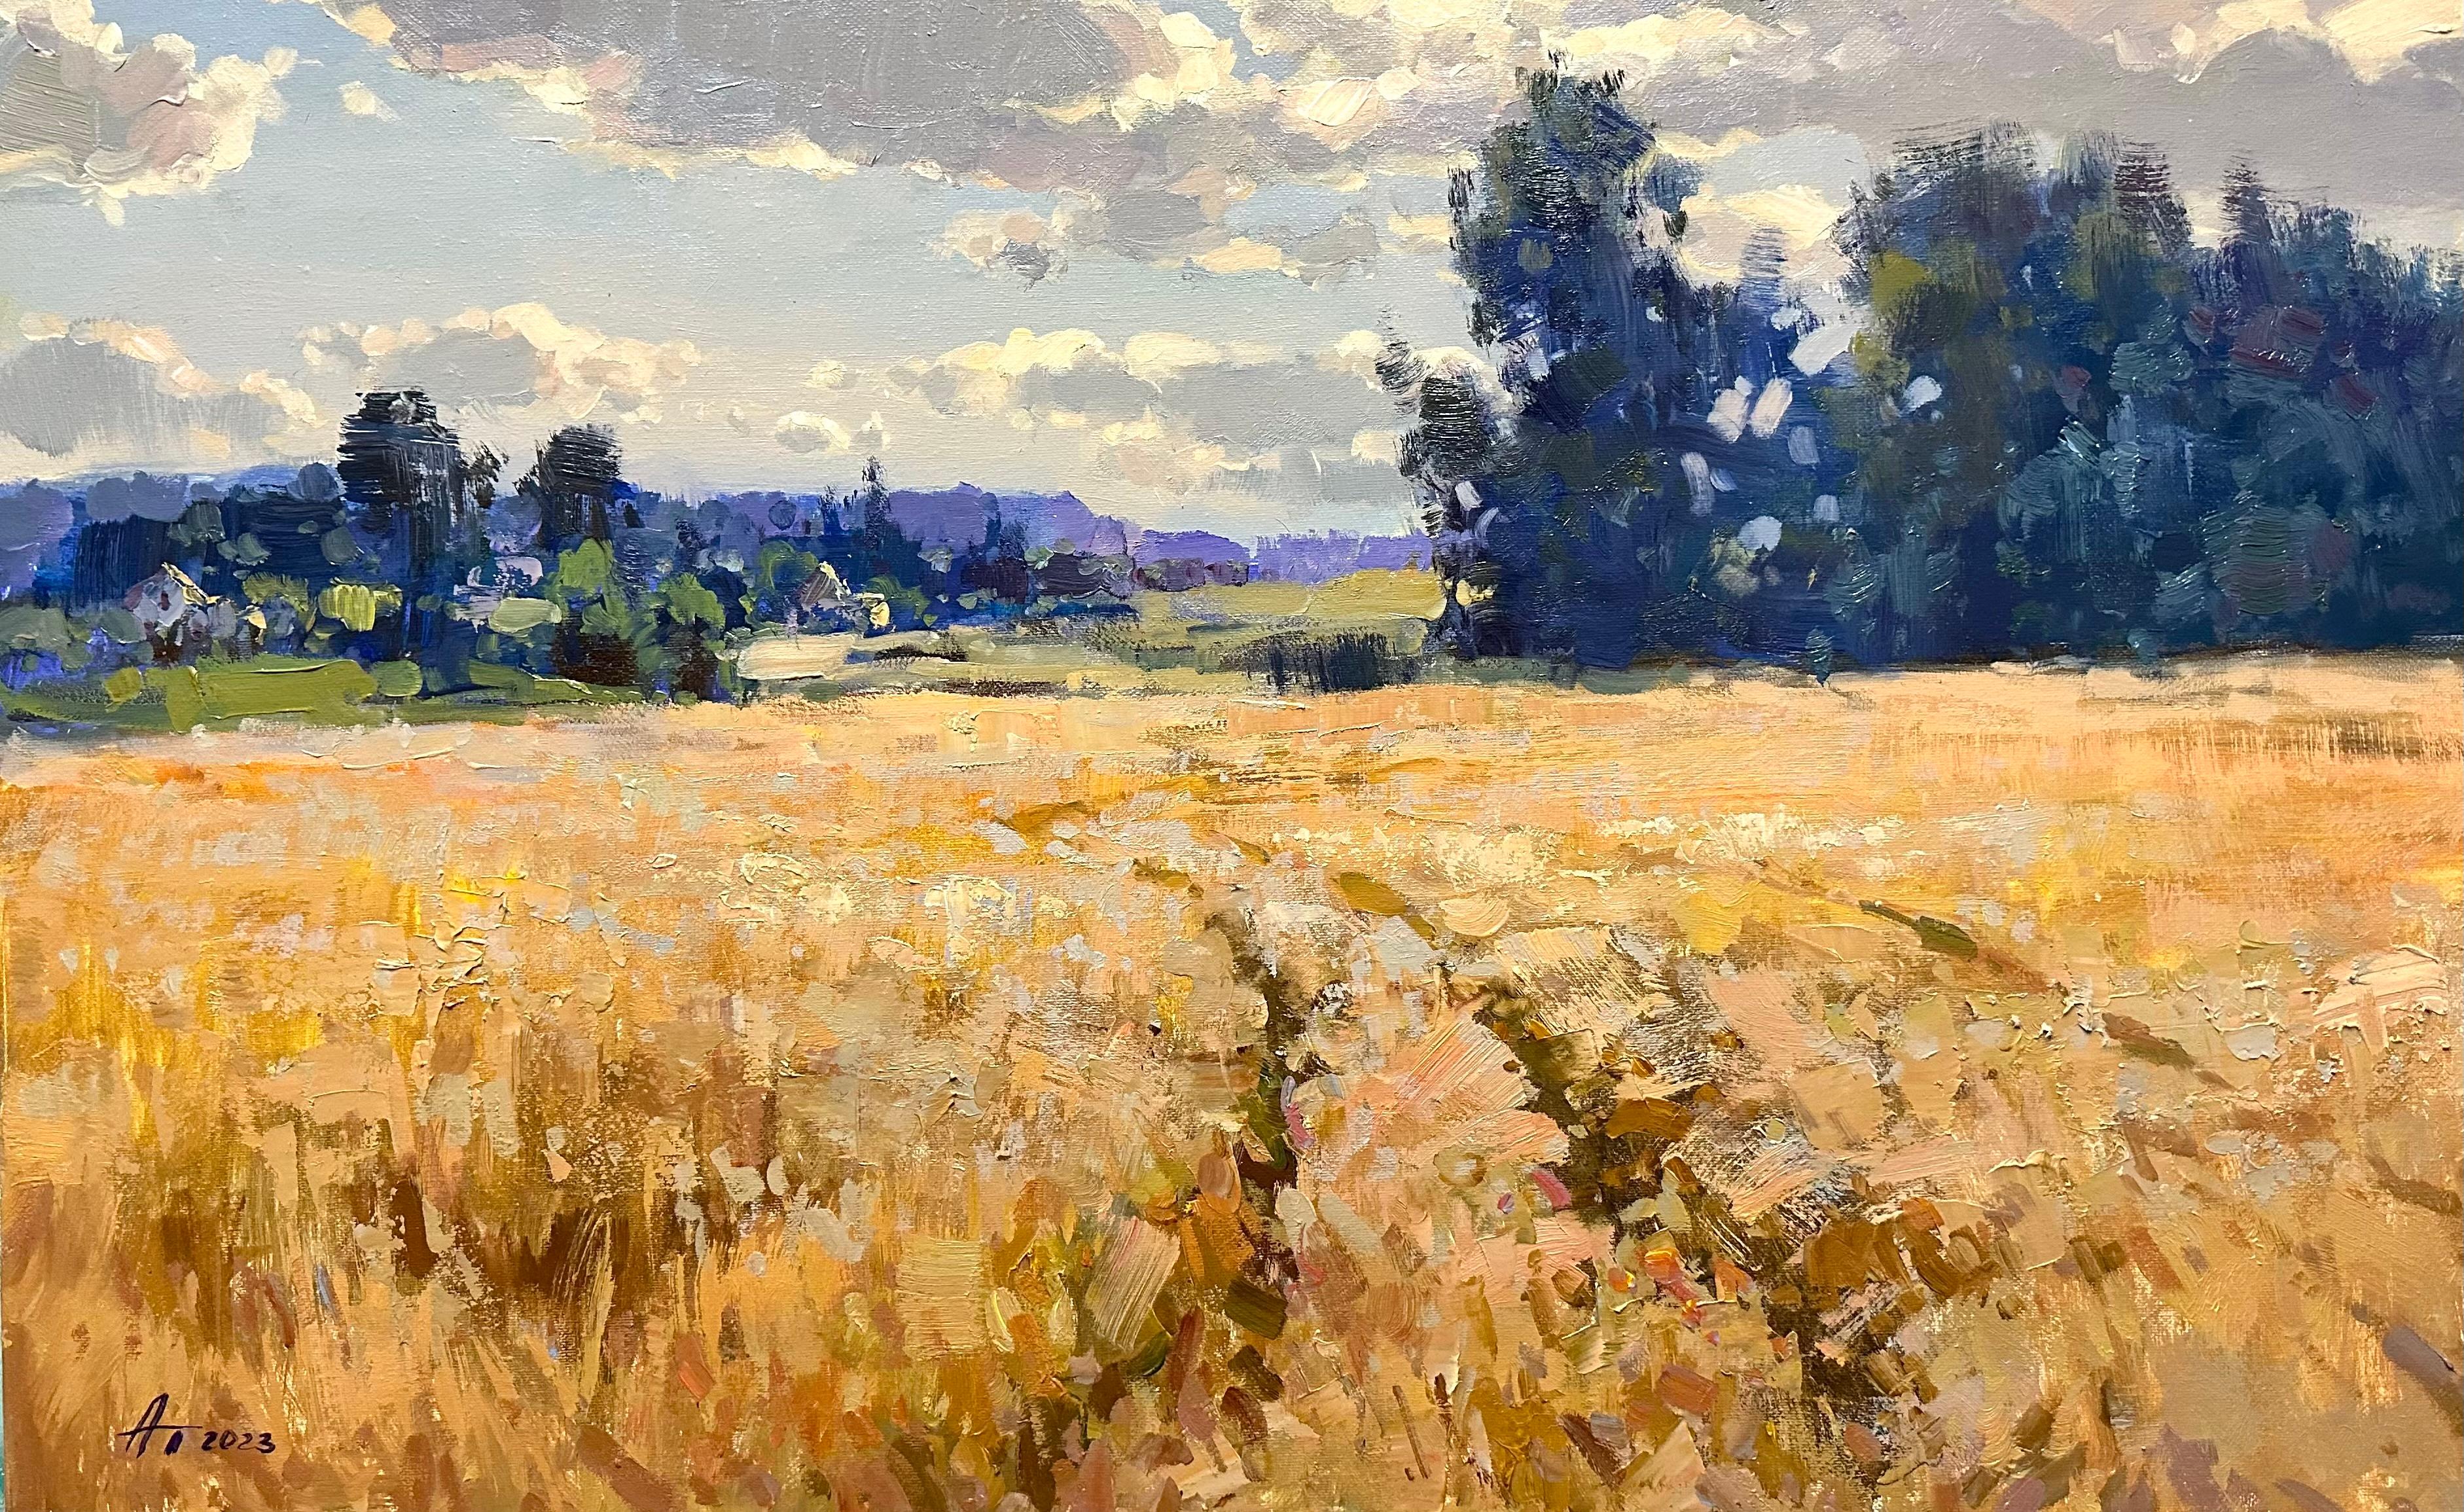 "Rye" is a painting that illustrates calmness and serenity. This artistic work depicts a golden field of rye, swaying in the breeze under a clear blue sky.
The color palette of the painting includes warm shades of golden and amber, creating a sense